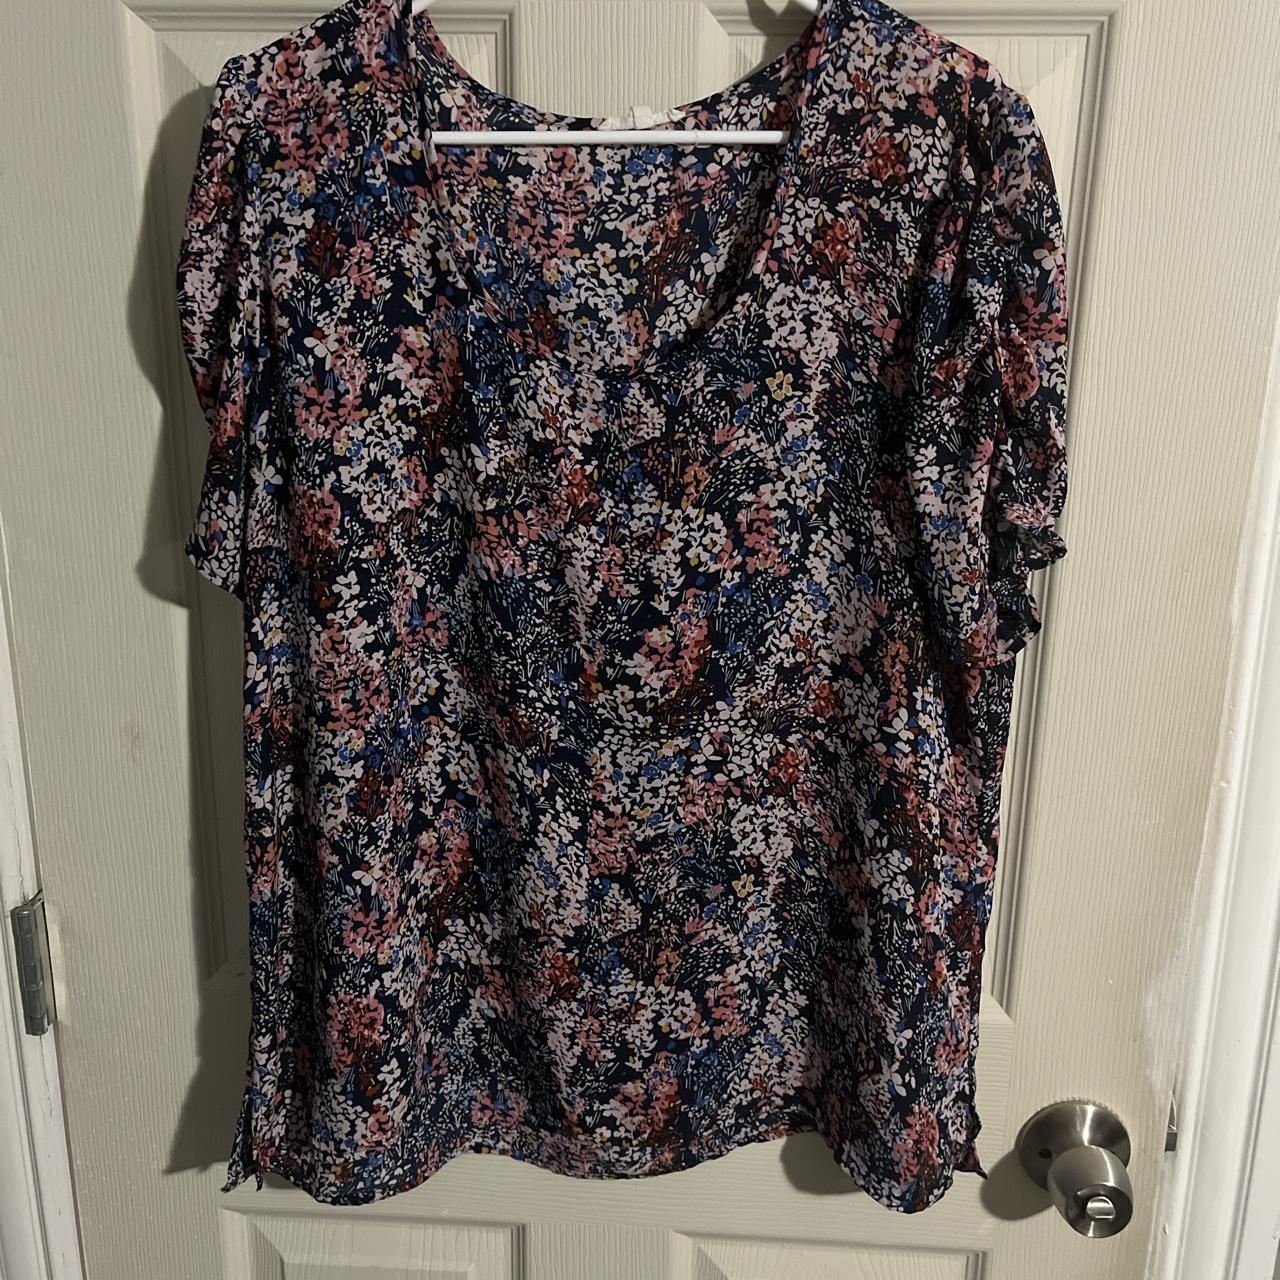 Maurices Women's Pink and Navy Blouse | Depop